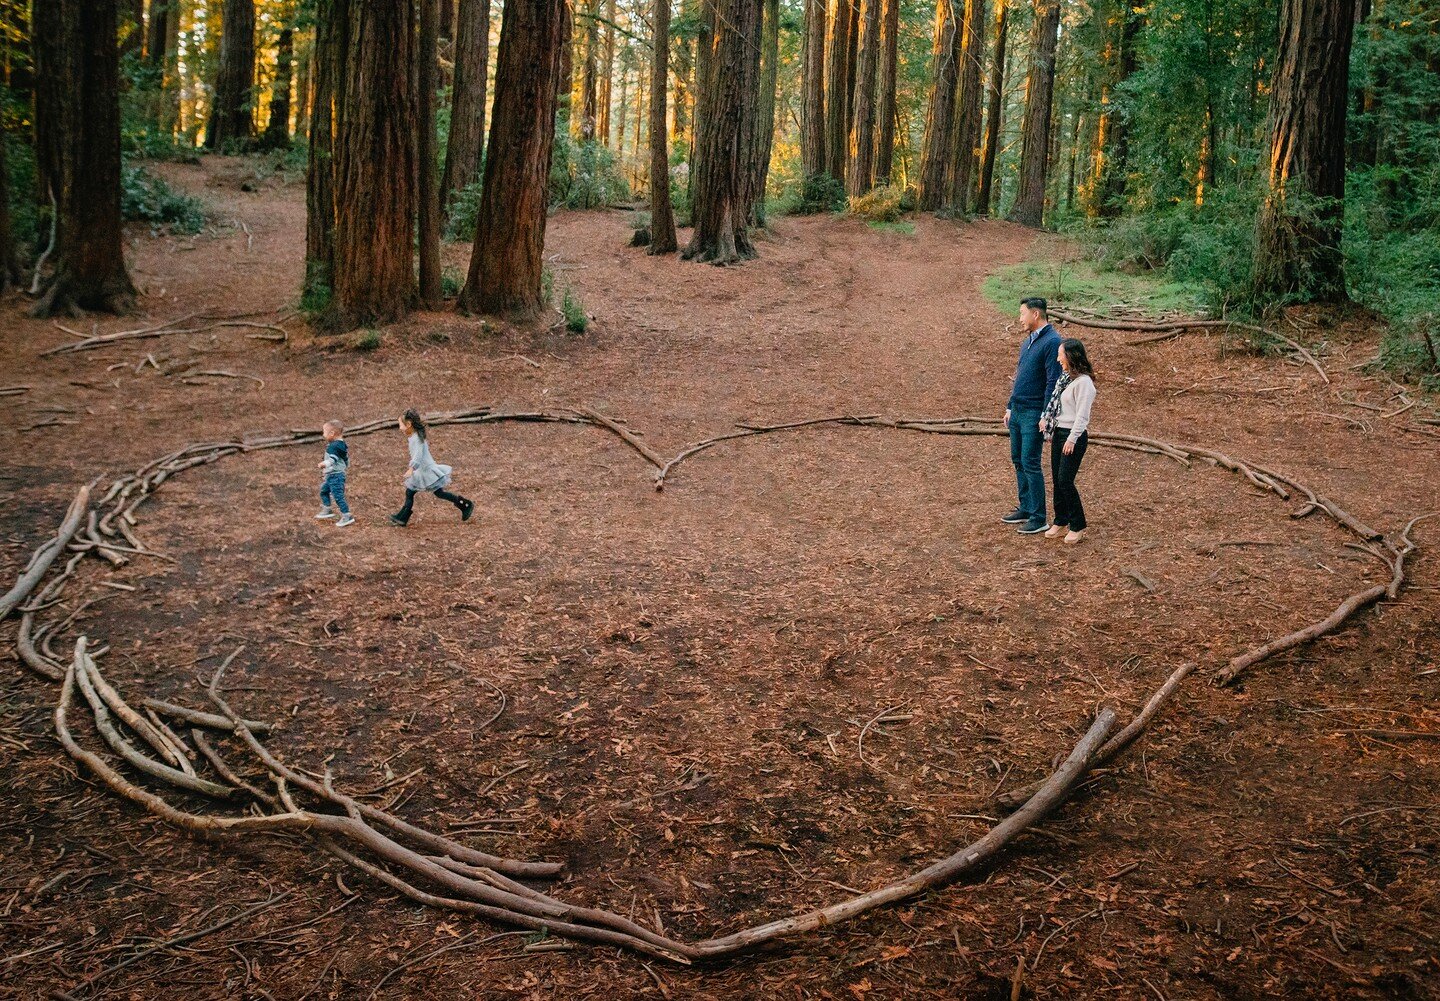 Family session in the redwoods at Joaquin Miller Park in Oakland. This place is always magical in all sorts of lighting. Except for when the sun goes down and you think you may have dropped your keys, so you try to double back into the darkness with 